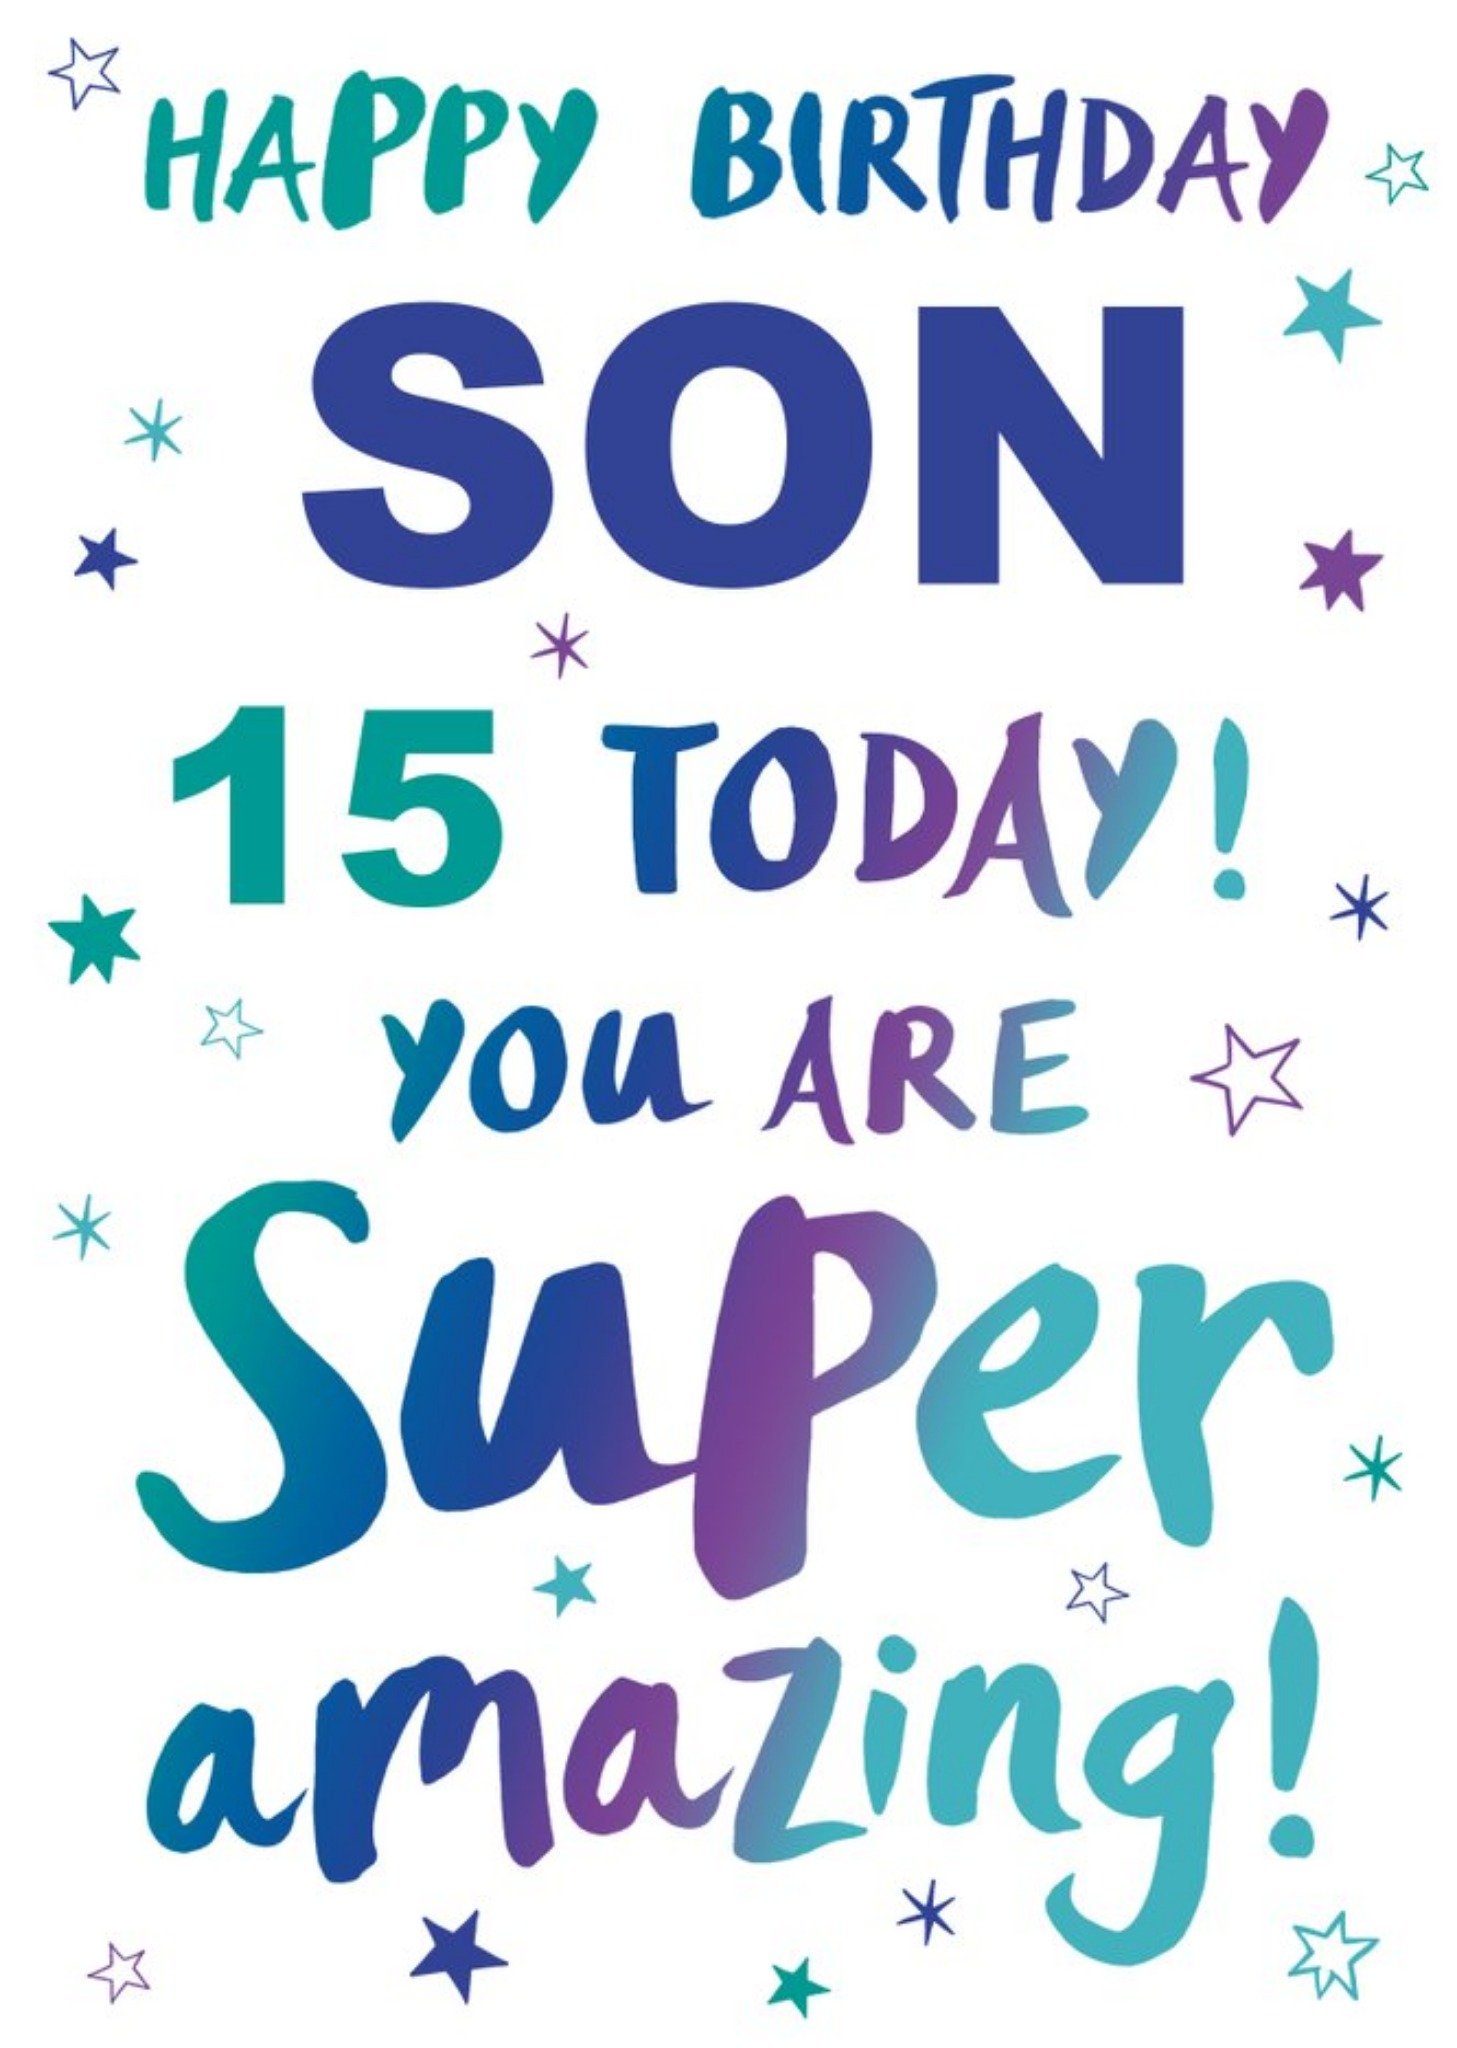 Moonpig Happy Birthday Son 15 Today You Are Super Amazing Card, Large